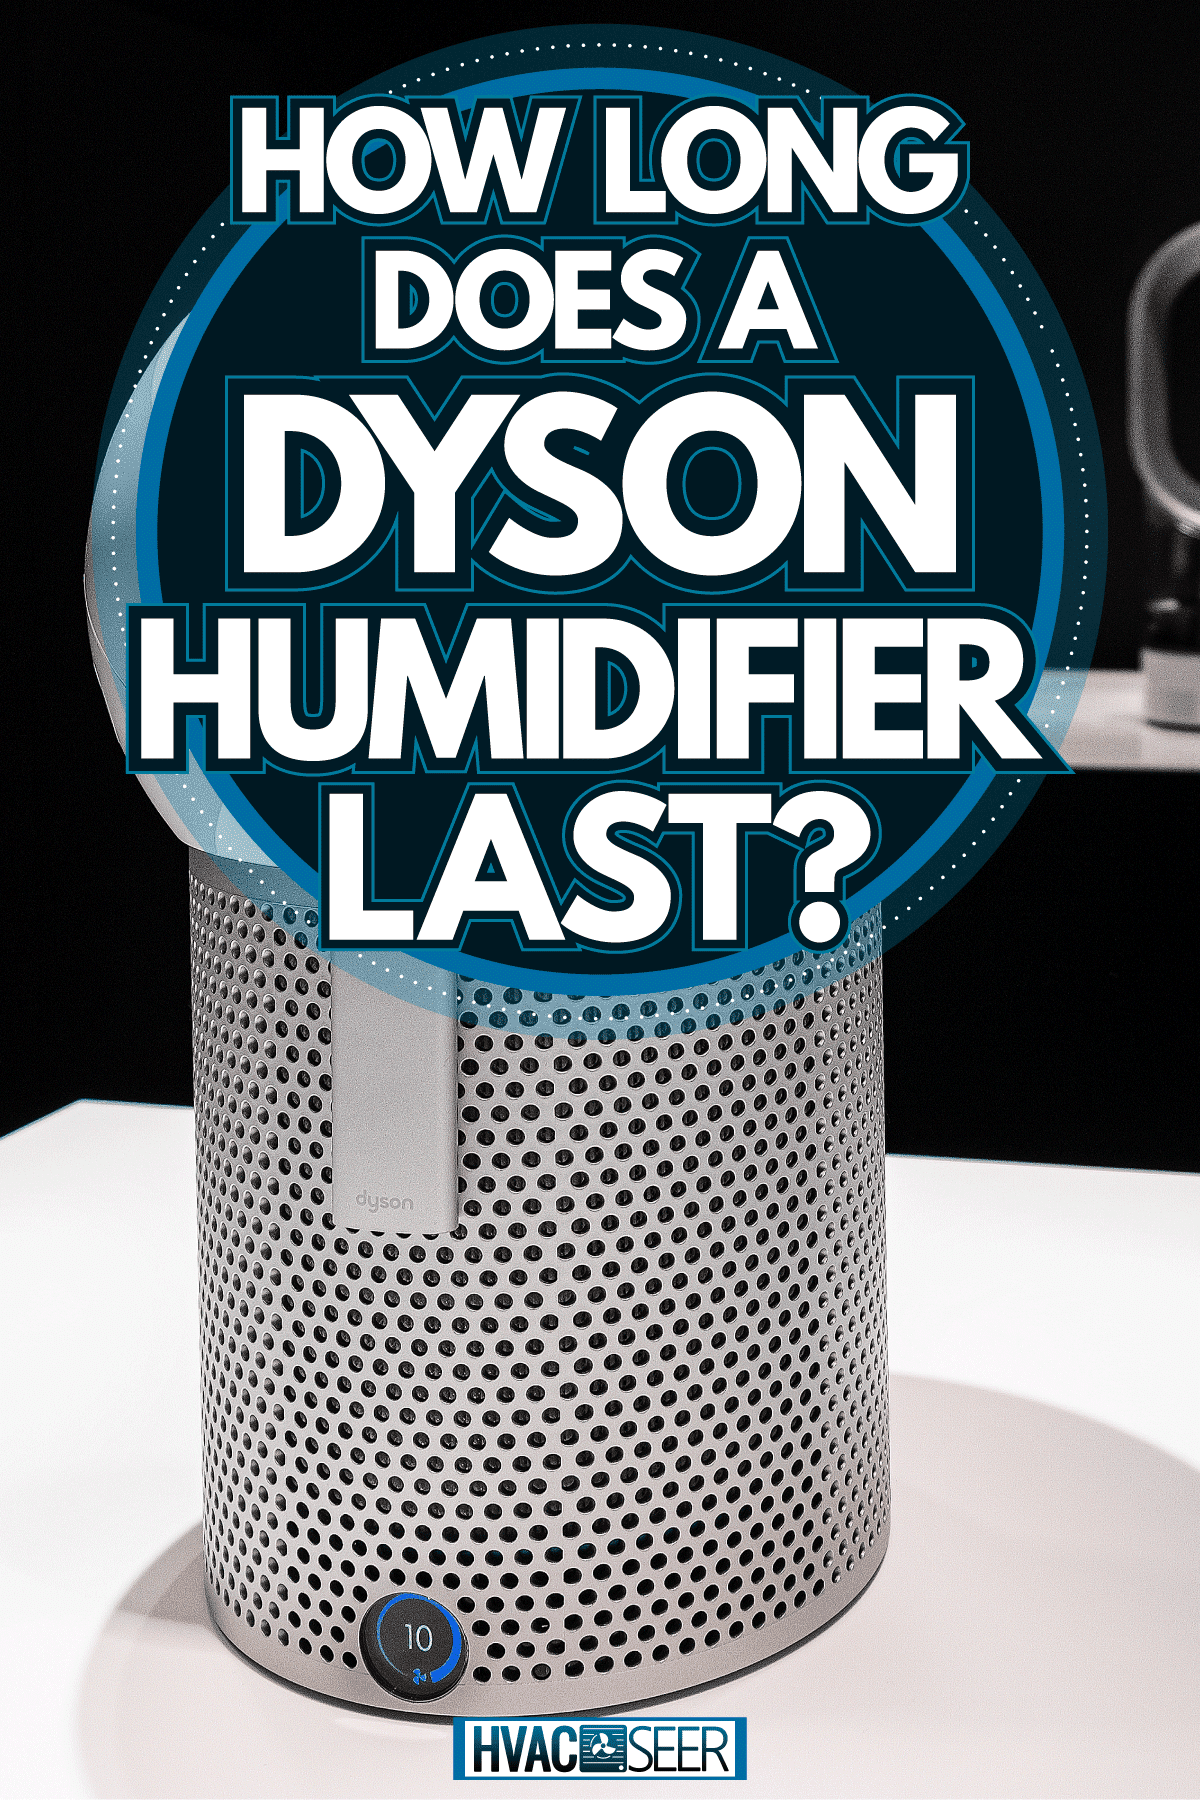 A Dyson air humidifier at a show room, How Long Does A Dyson Humidifier Last?